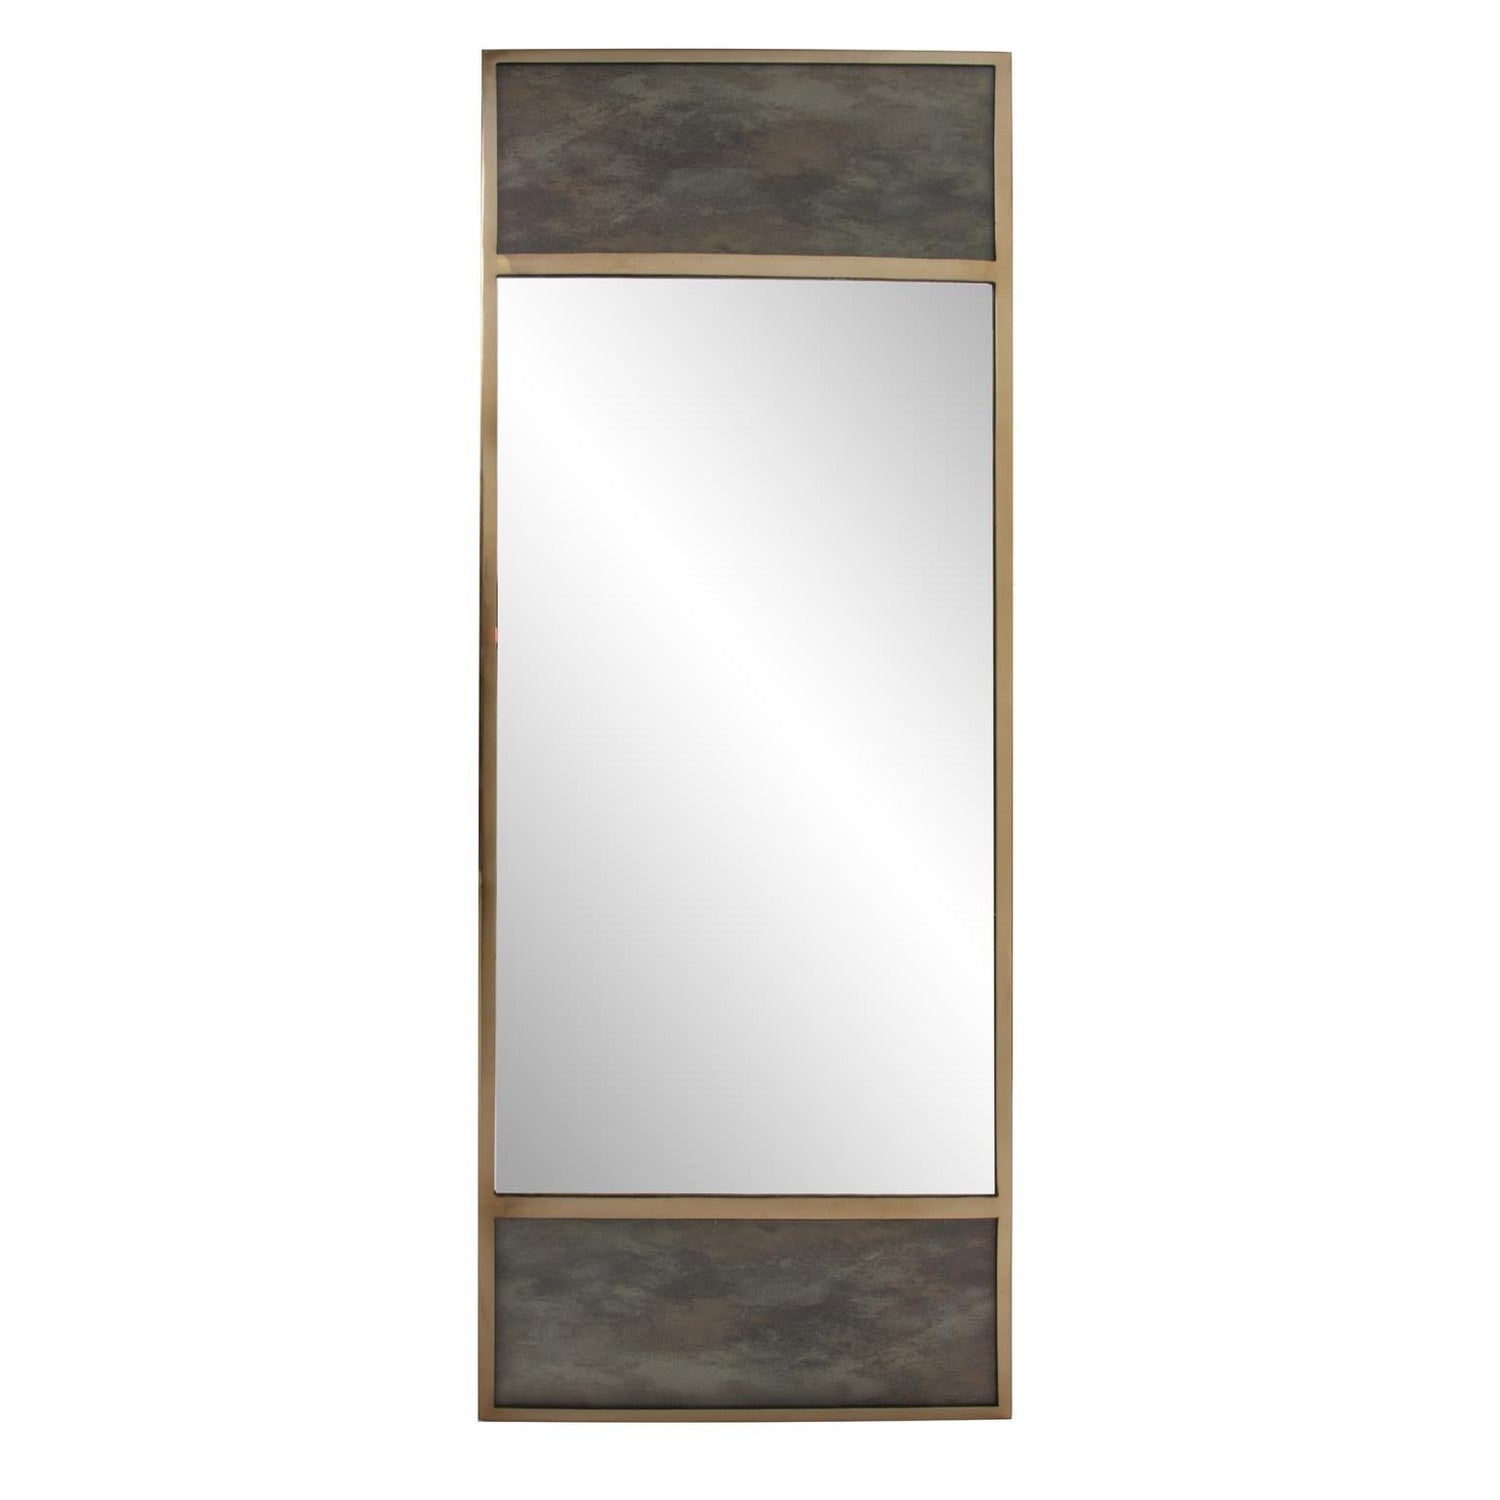 Albizzi Antiqued Paneled Mirror-The Howard Elliott Collection-HOWARD-140003-Mirrors-2-France and Son